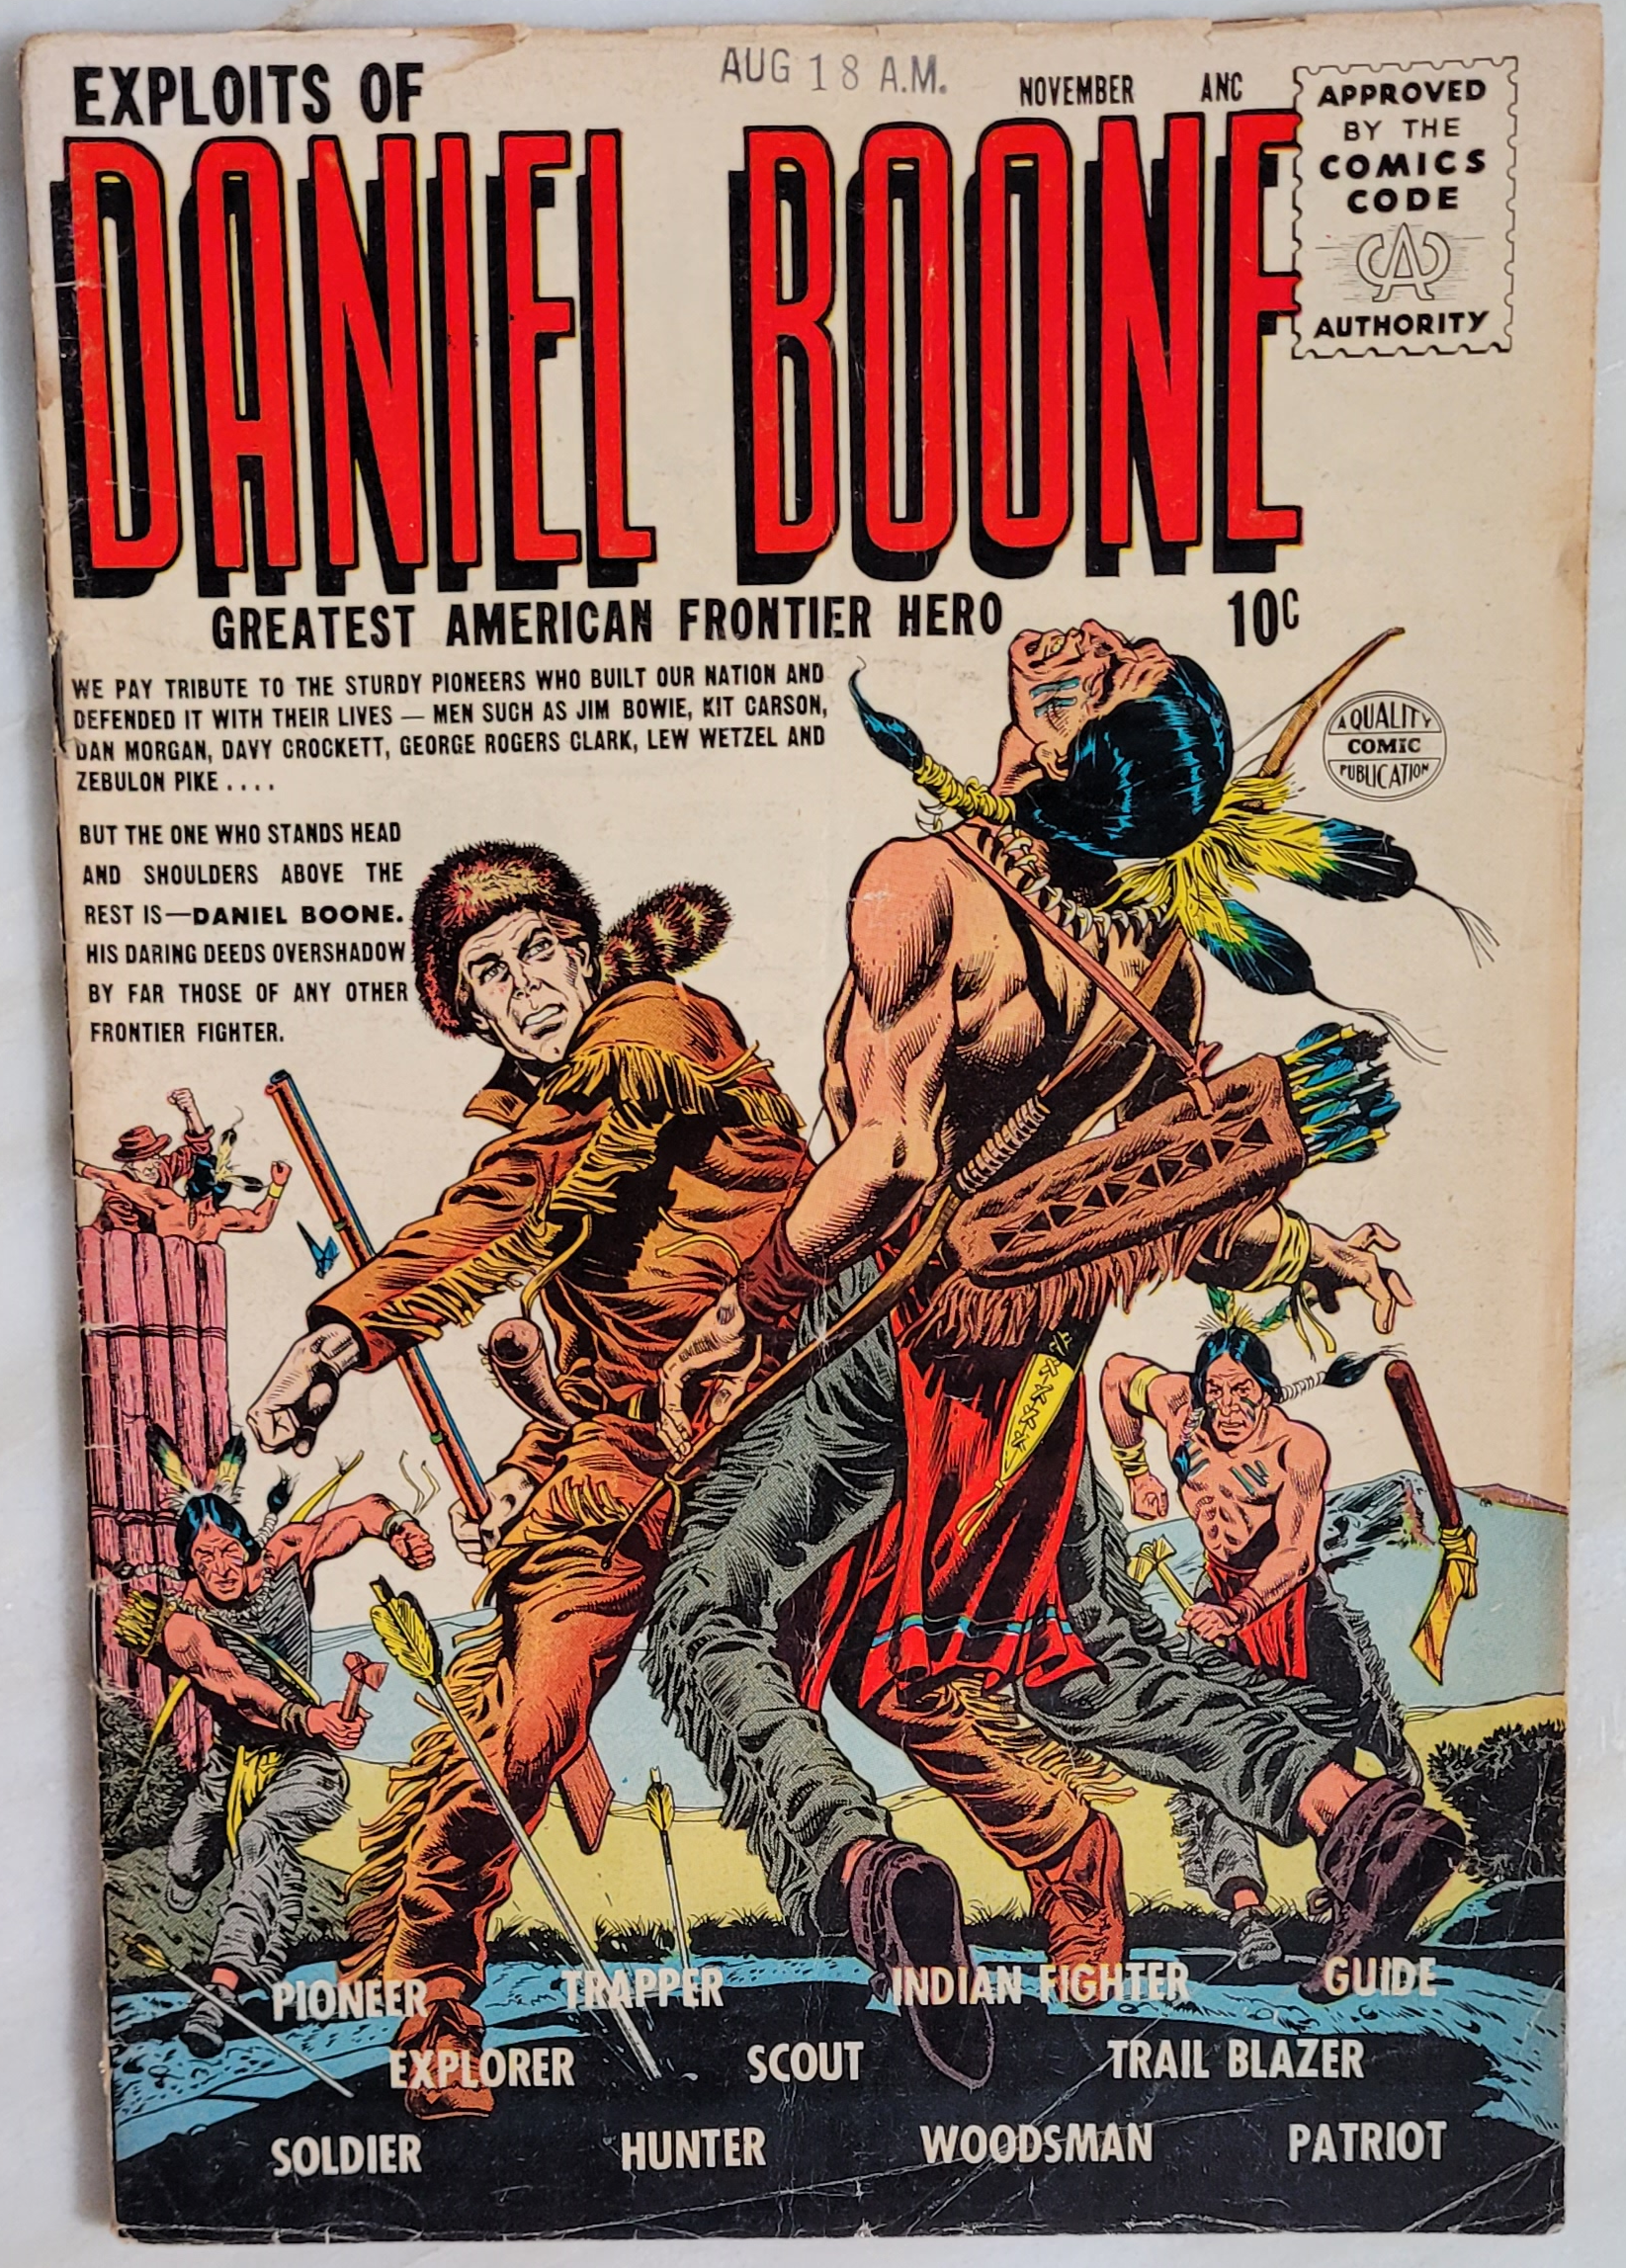 Exploits of Daniel Boone # 1 - Front Cover